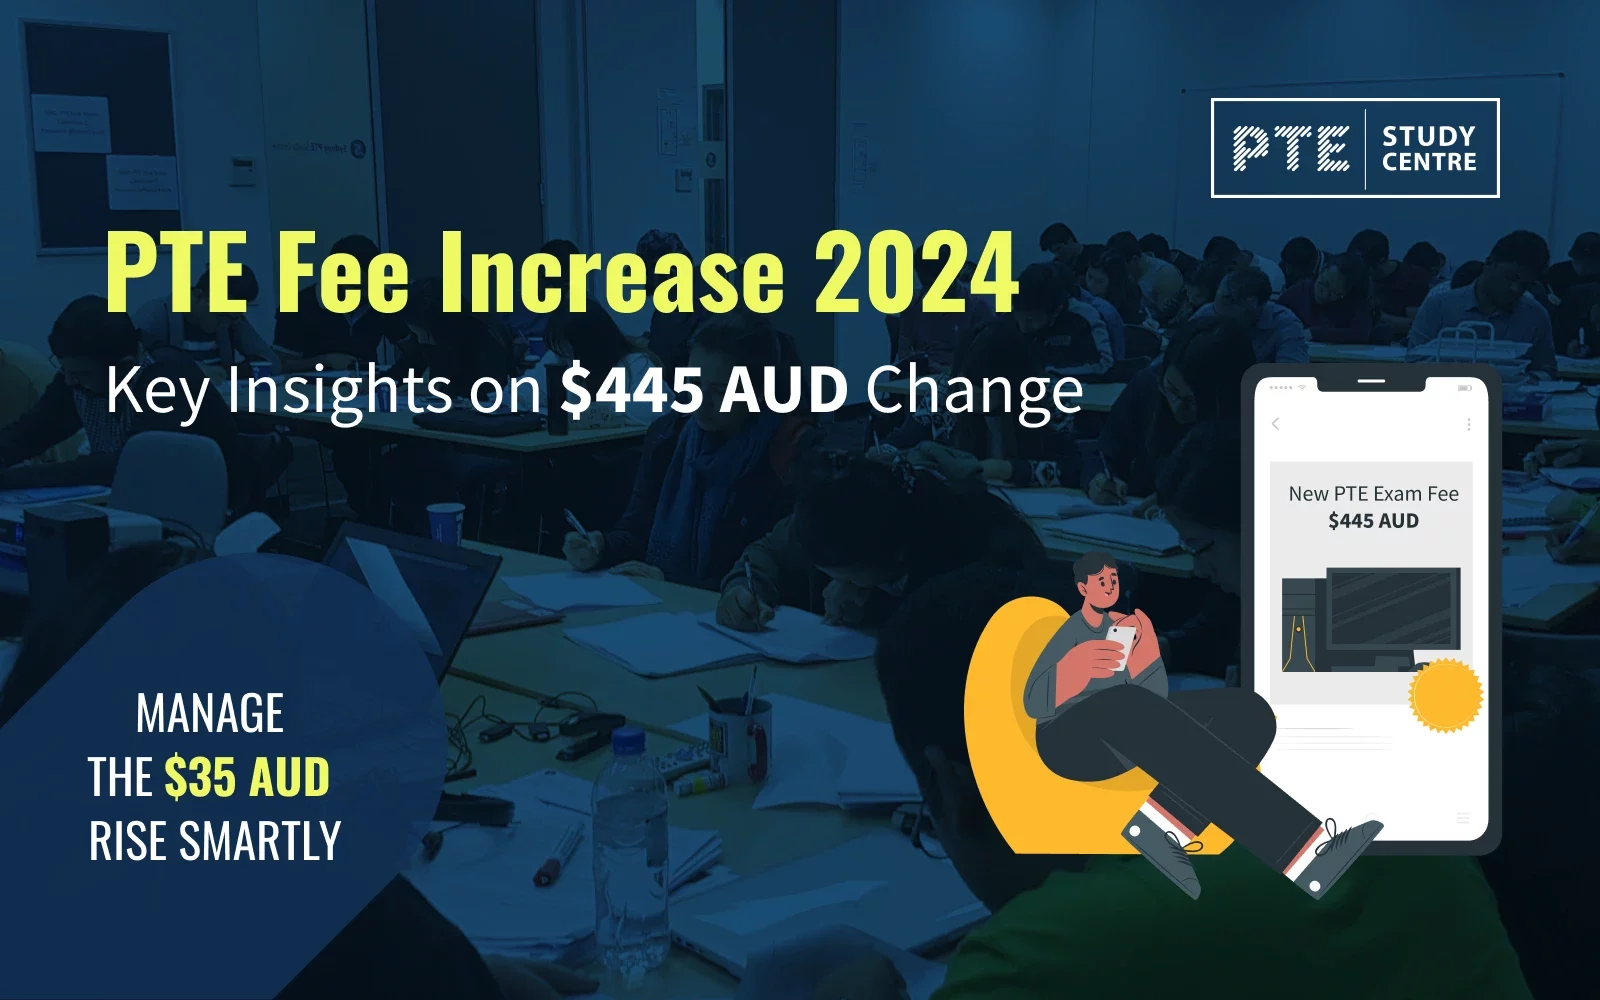 PTE Fee Increase 2024: Key Insights on AUD 445 Change image